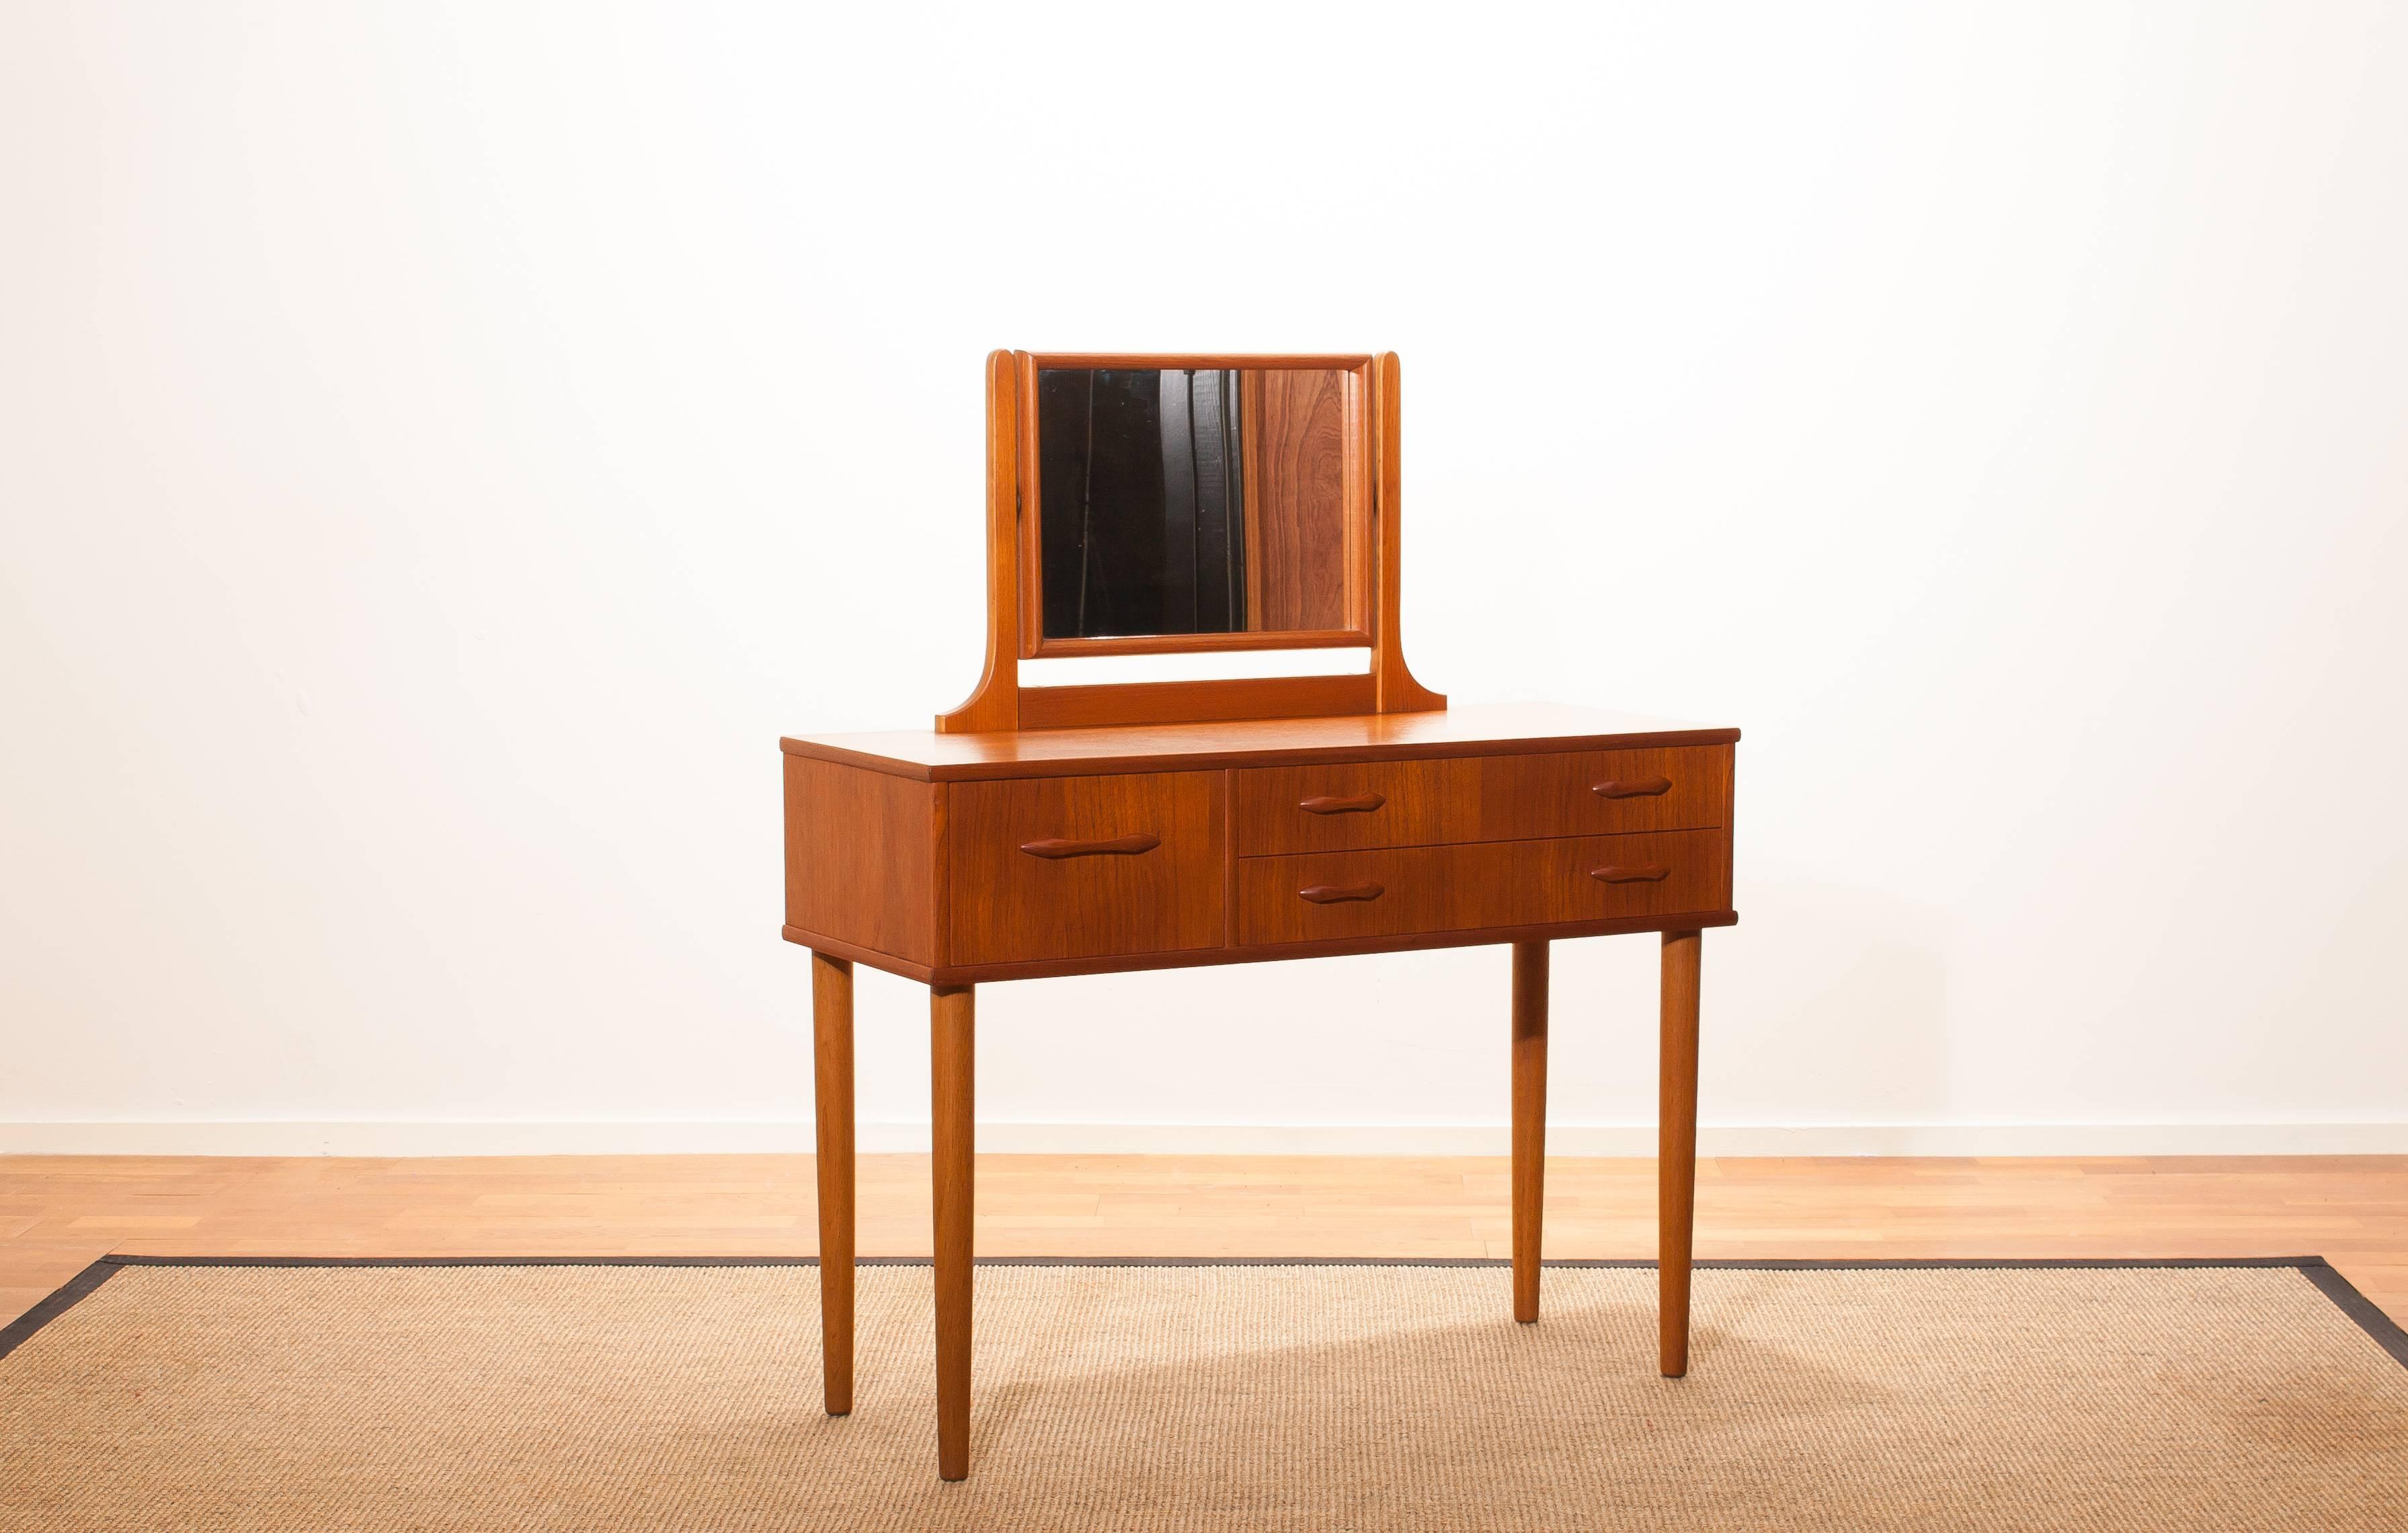 Beautiful dressing table by Ulferts Sweden.
This dressing table is made of teak and consistent of three drawers and a mirror.
It is in a wonderful condition.
Period 1950s
Dimensions: H. 111 cm (including mirror, height of the table top 72